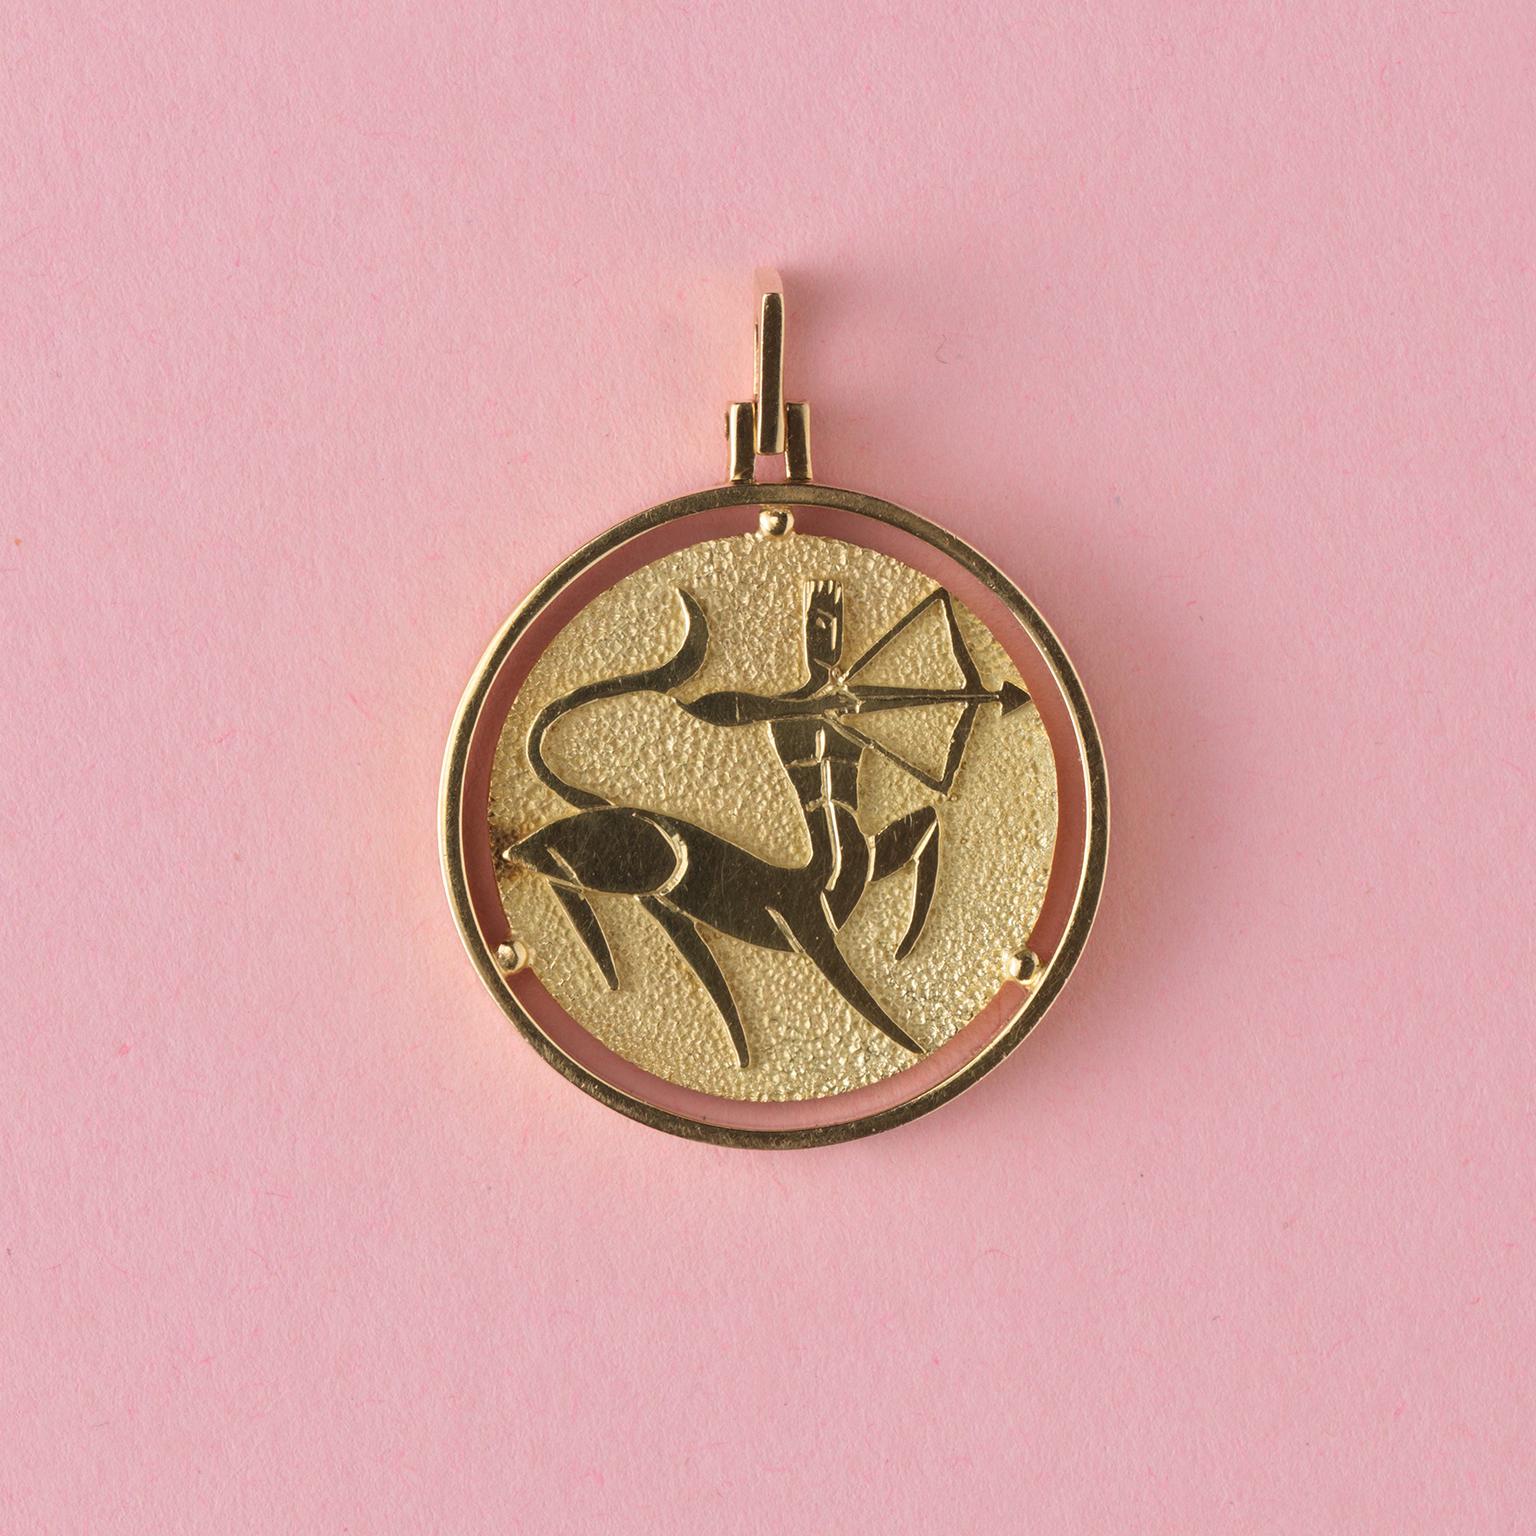 An 18 carat gold sagittarius pendant, with the same abstracted centaur on each side.
retailed by Steltman between 1924 and 1957.

weight: 12.2 grams
dimensions: 3.7 x 2.8 cm